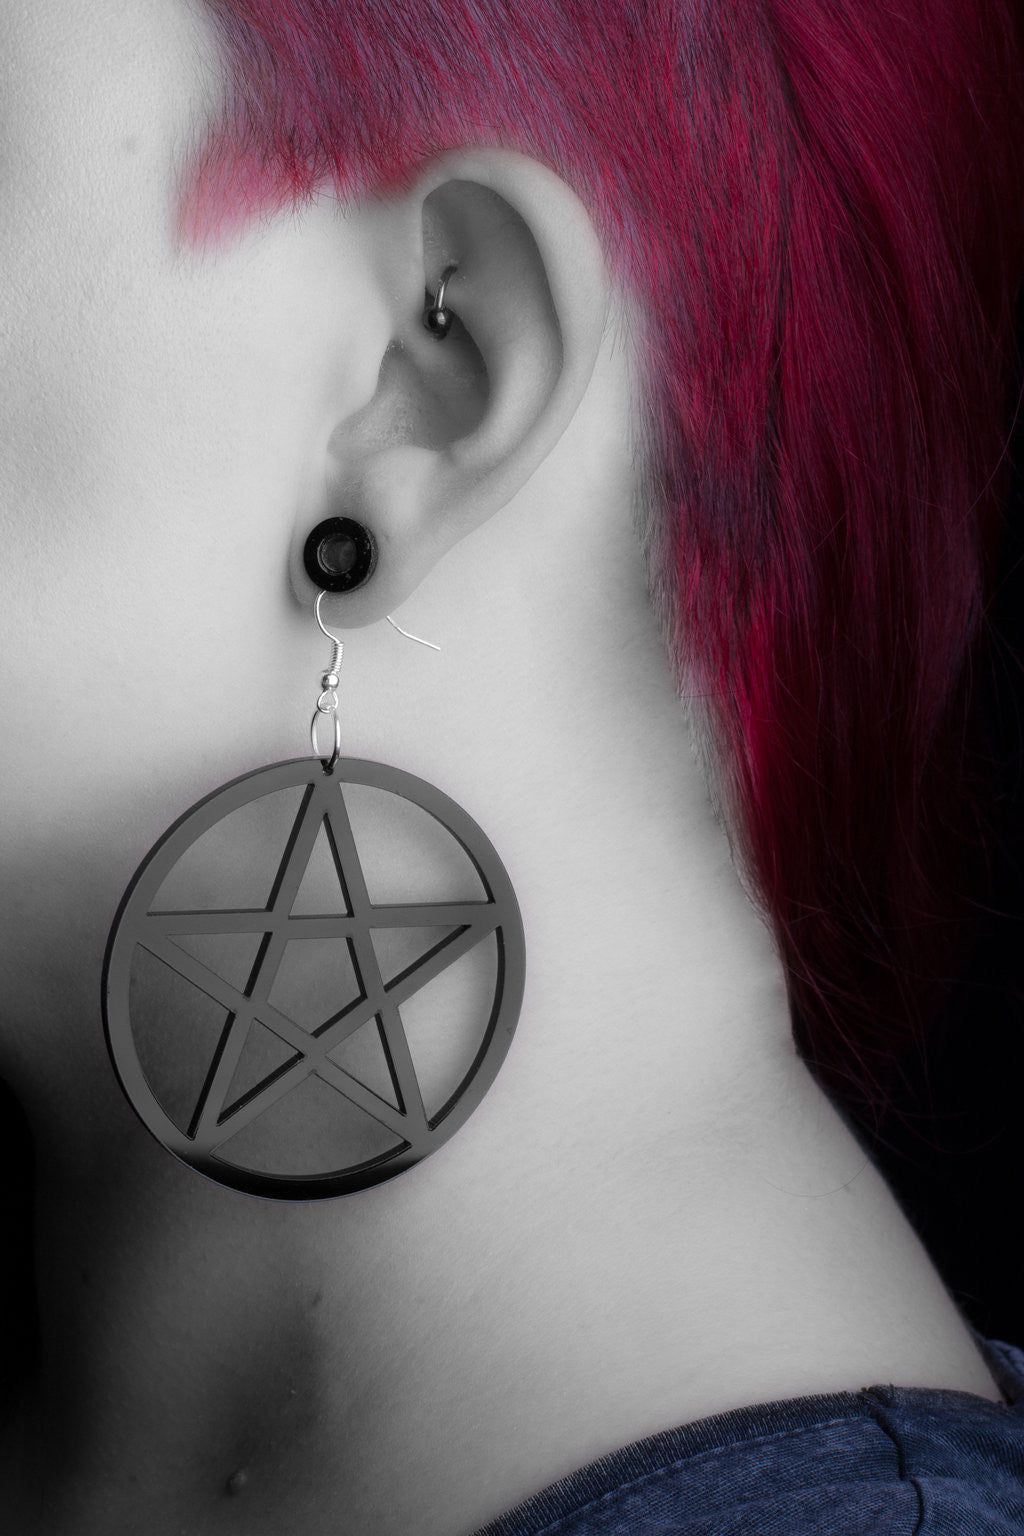 Carman Pentagram Earrings - Witchy Wiccan wicca symbol Strega Plastic Pagan over-size magic Industrial gloss Witch Pentagram Nu-goth Gothic Goth Dangly Black Acrylic